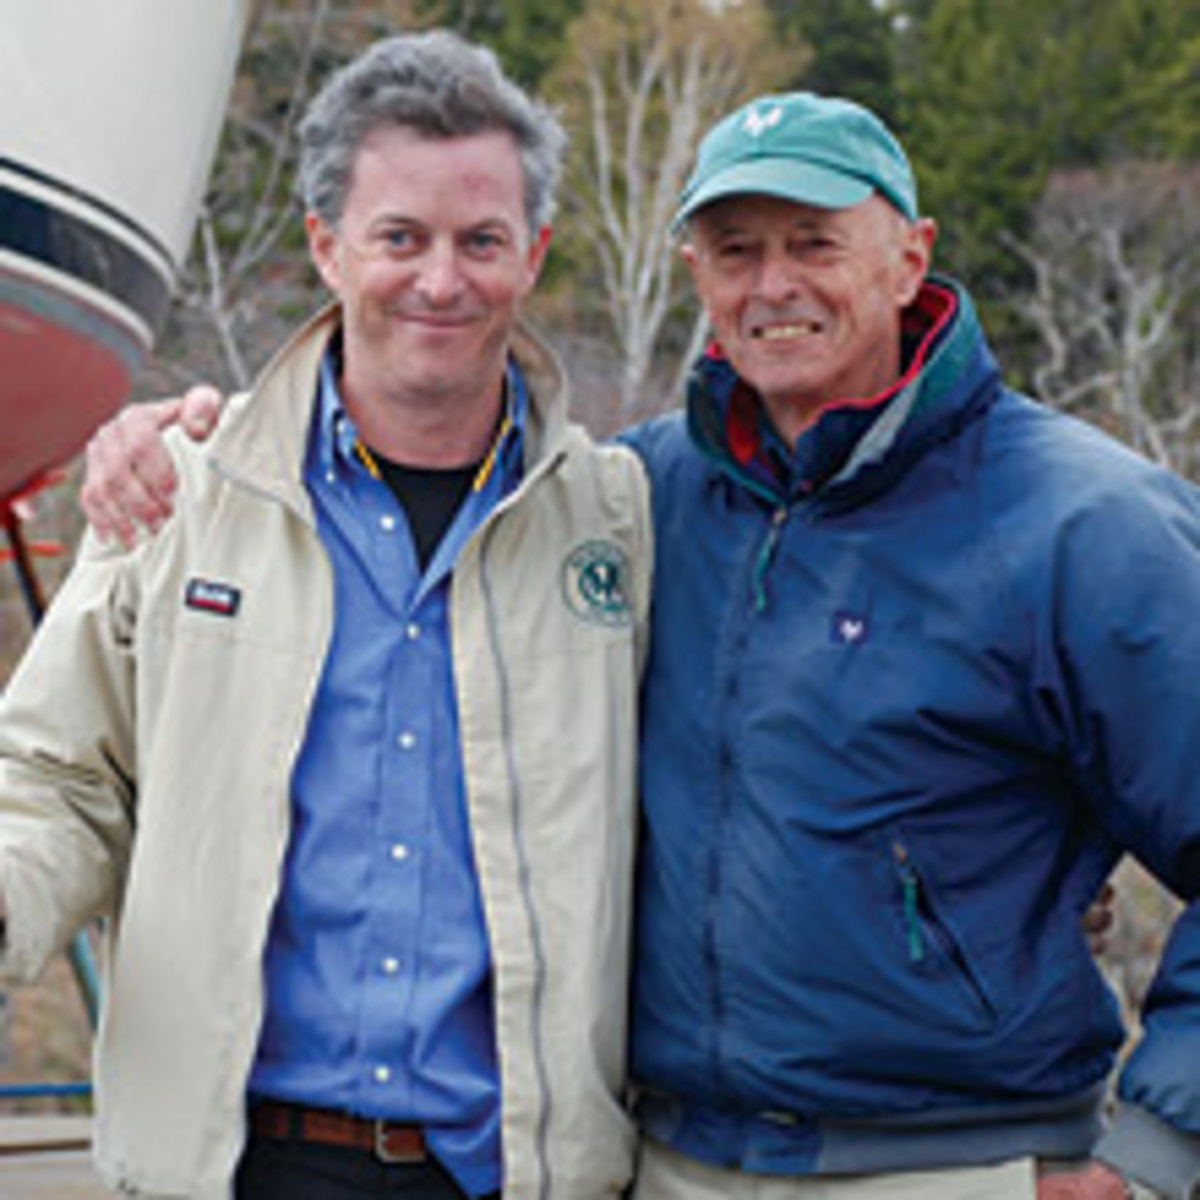 The family business is boating. Morris' son Cuyler (left) succeeded him after his retirement in 2001.